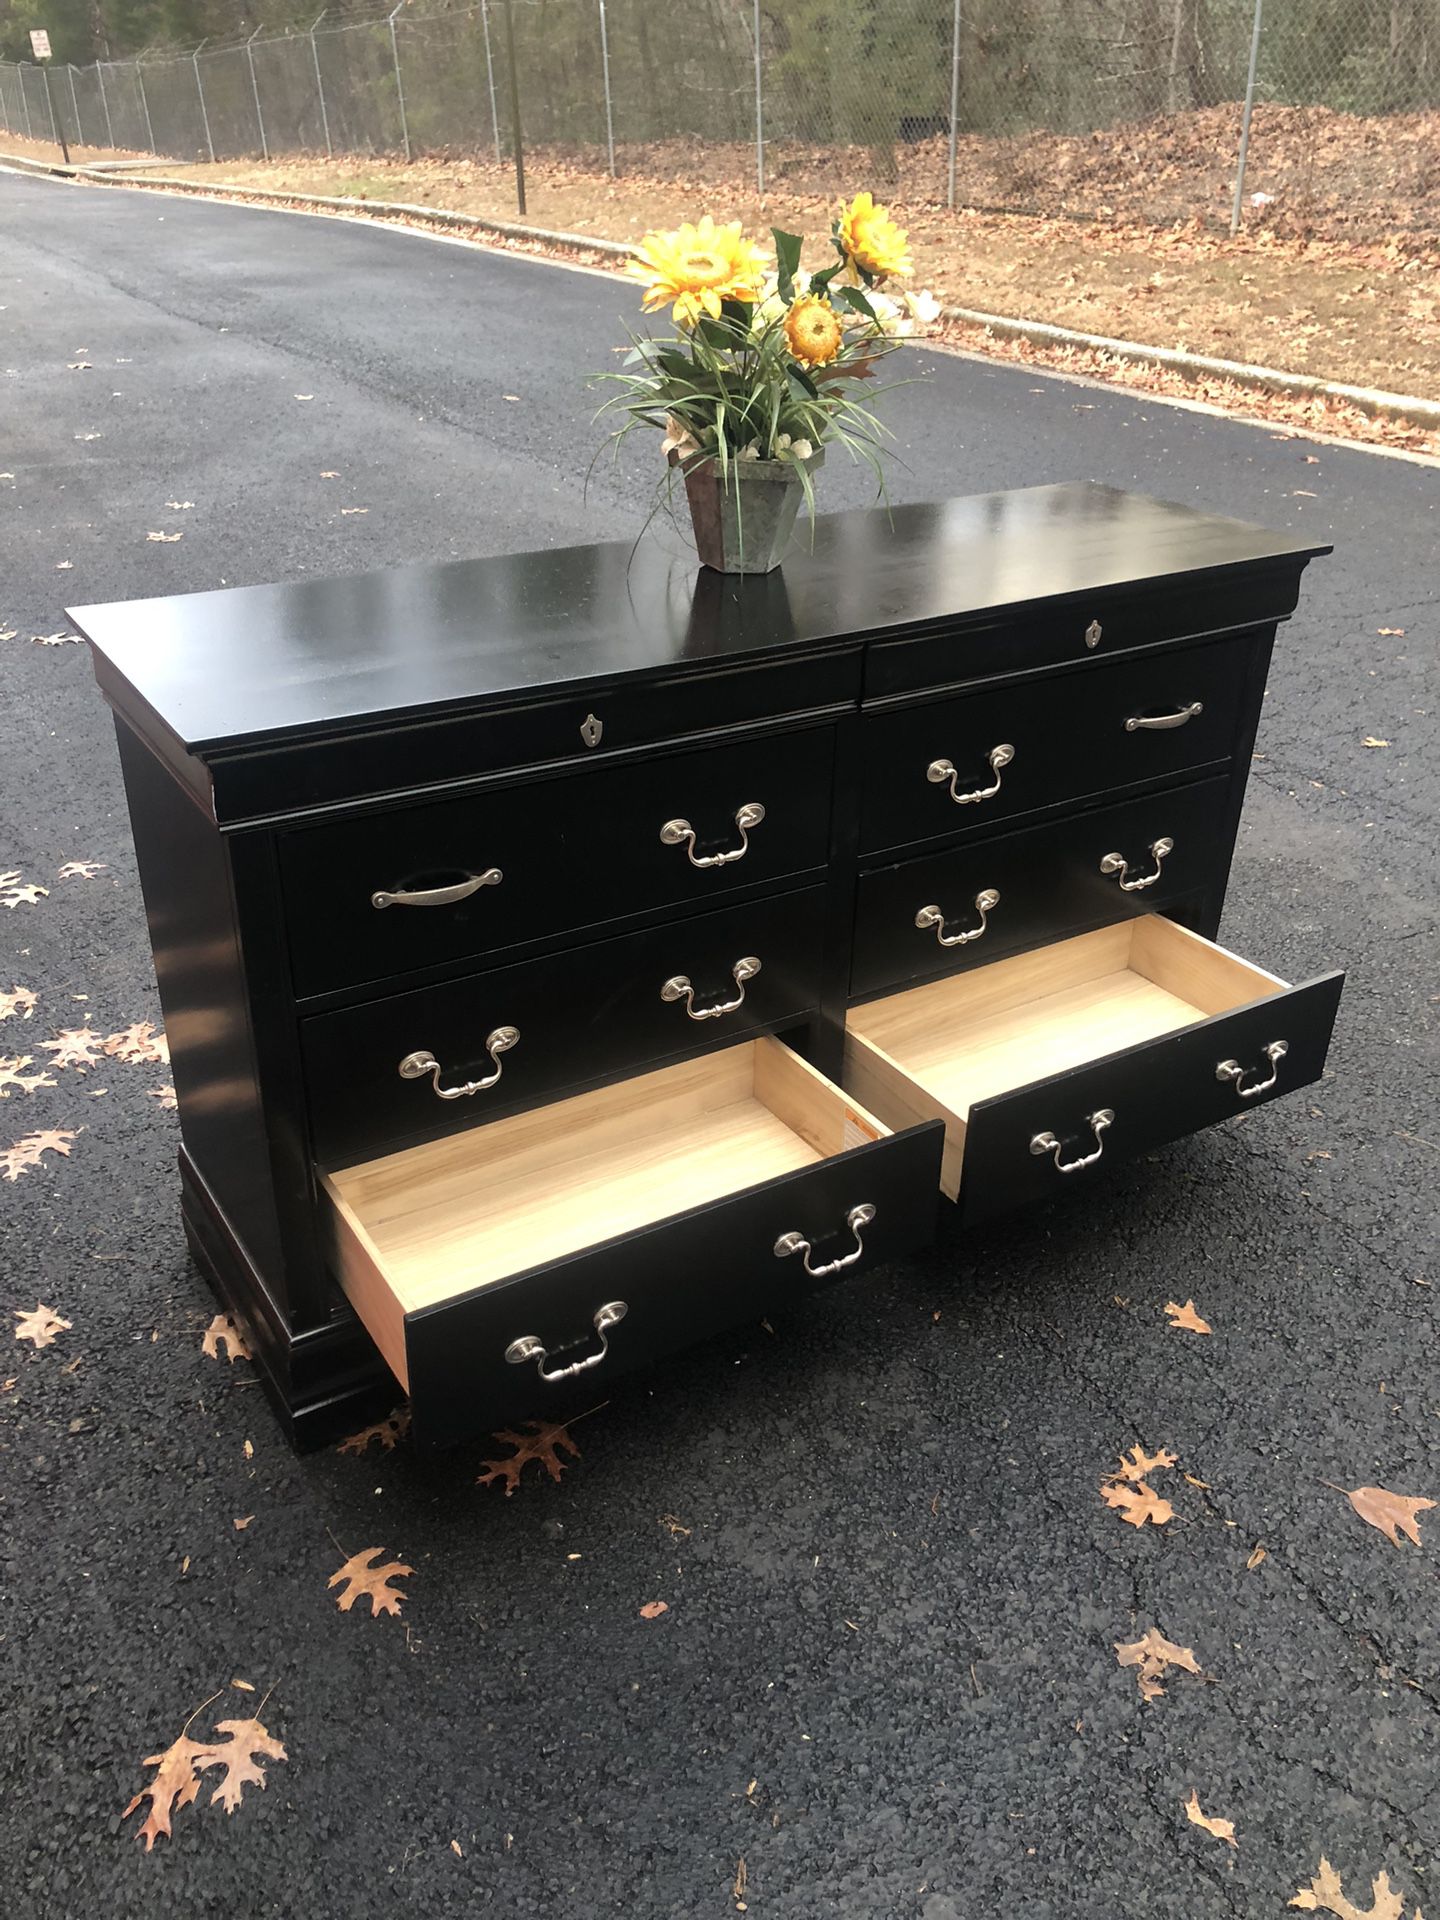 Quality  Modern Black  Long Dresser  With  Big Drawers  Drawers  Sliding Smithy Great  Condition